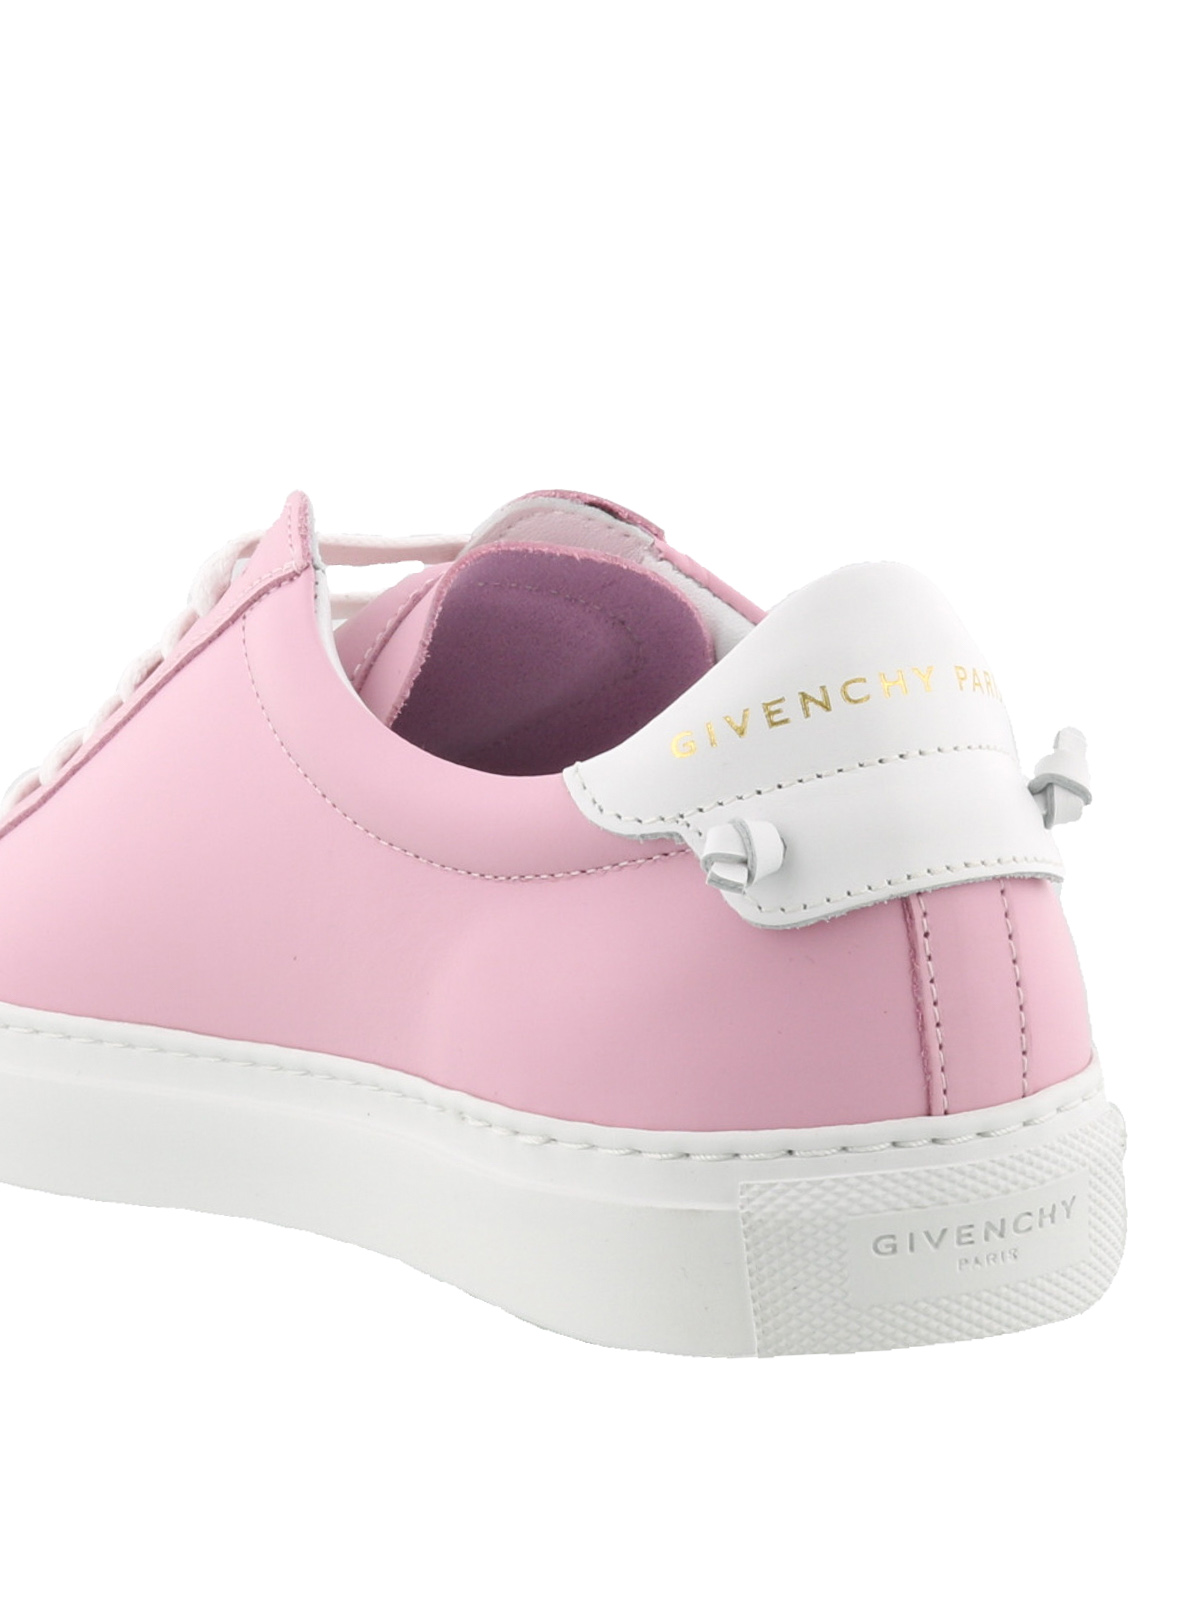 givenchy shoes pink